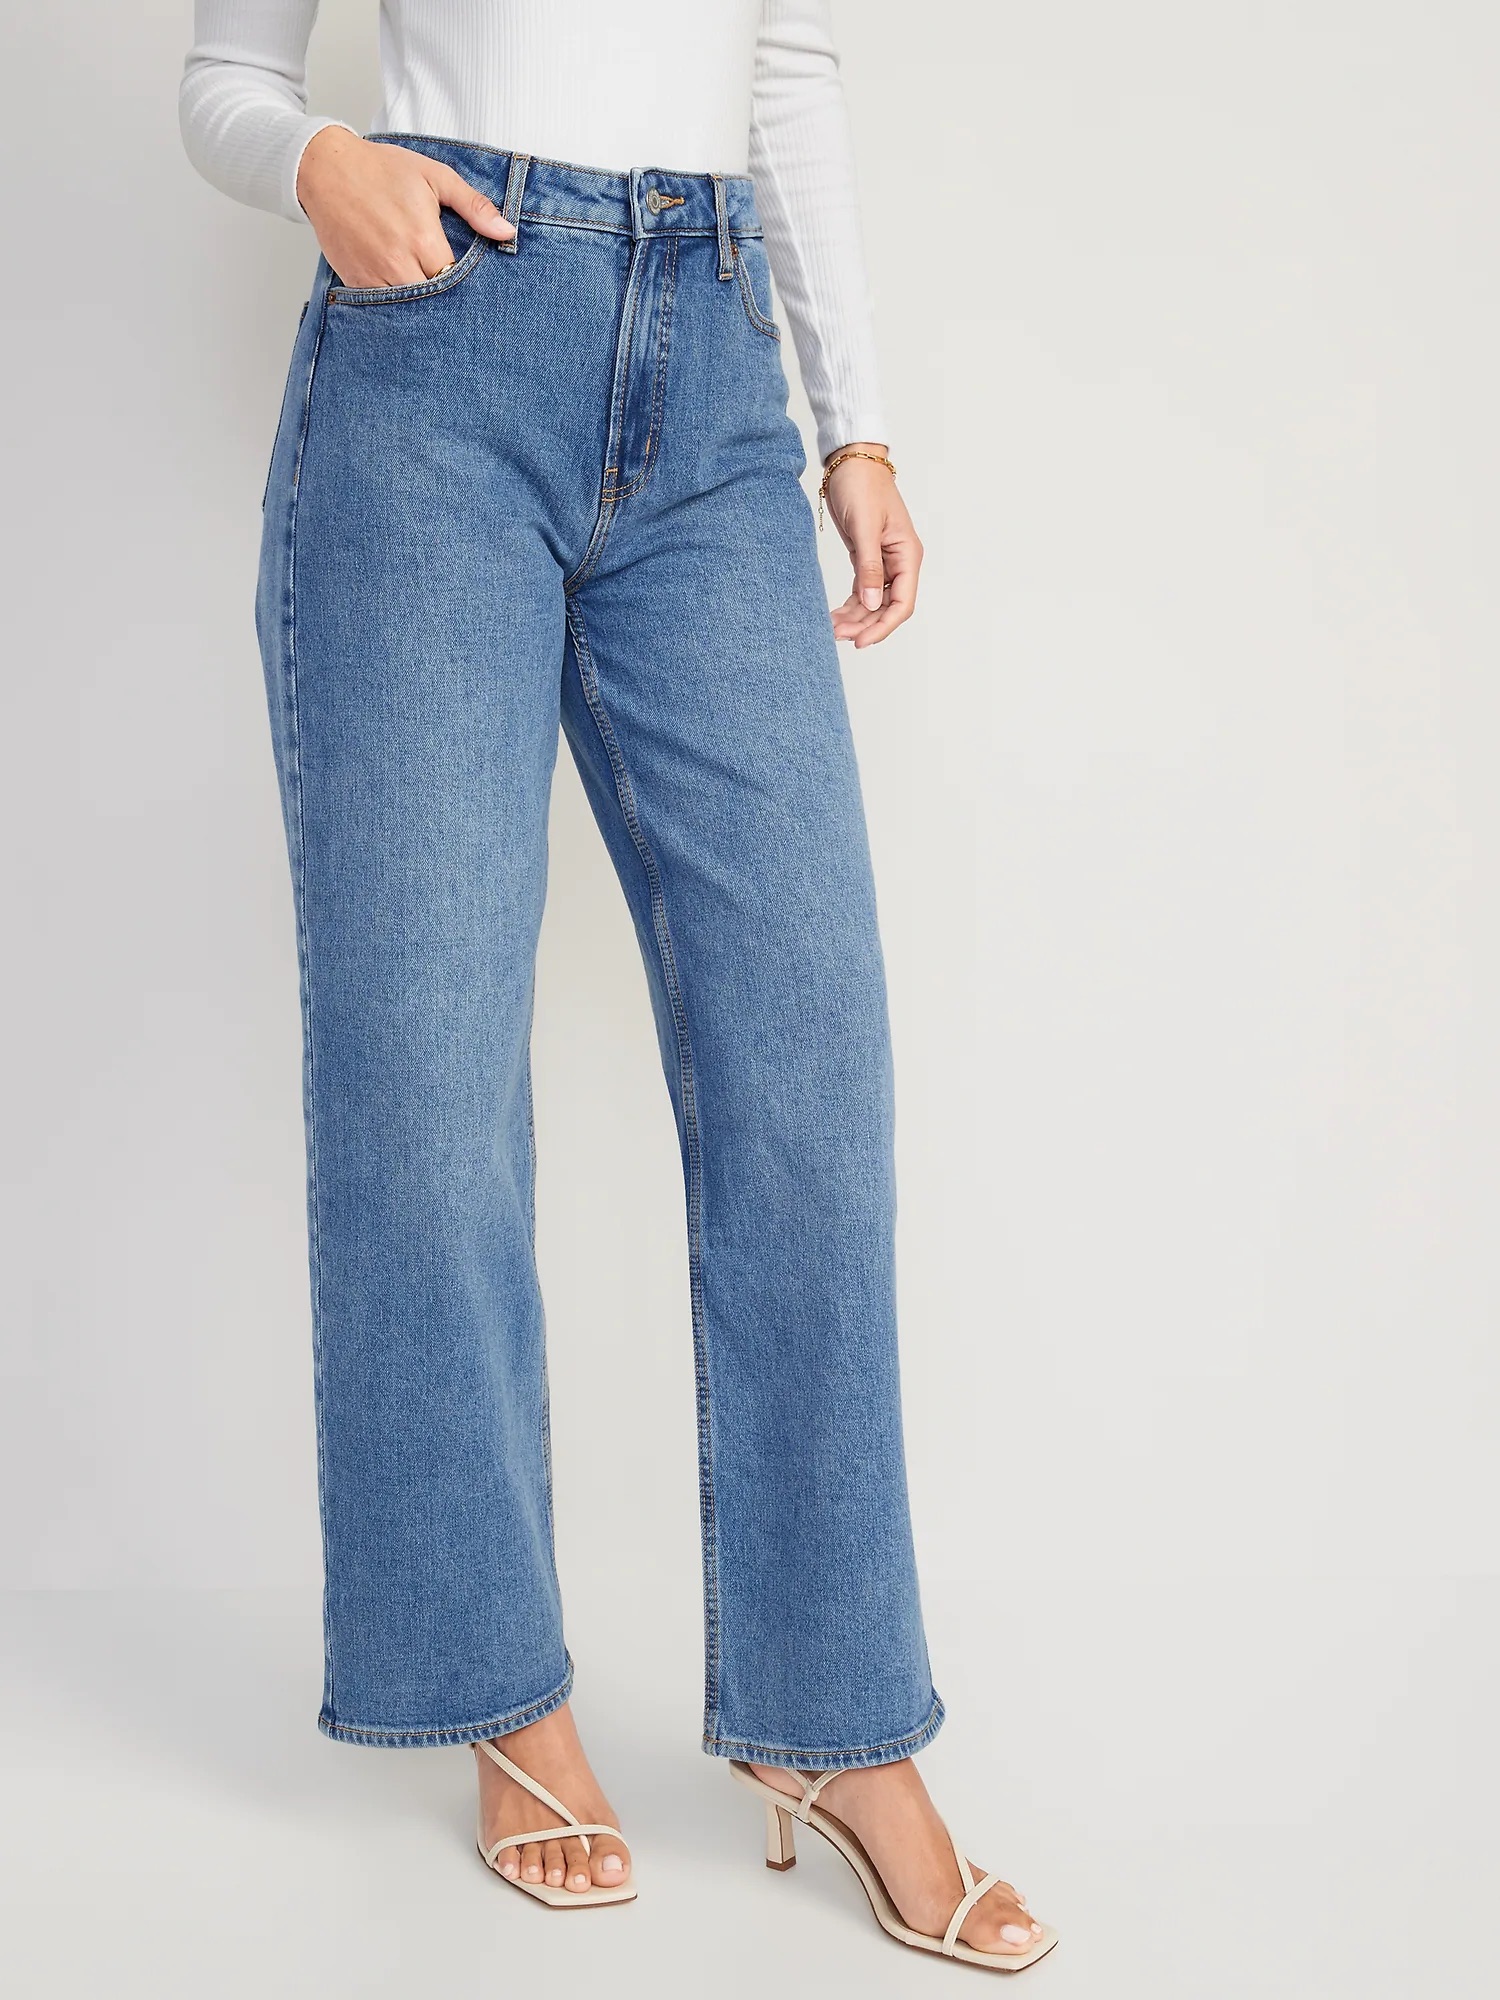 The 17 Best Jeans for Tall Women, From Tall Women | Who What Wear